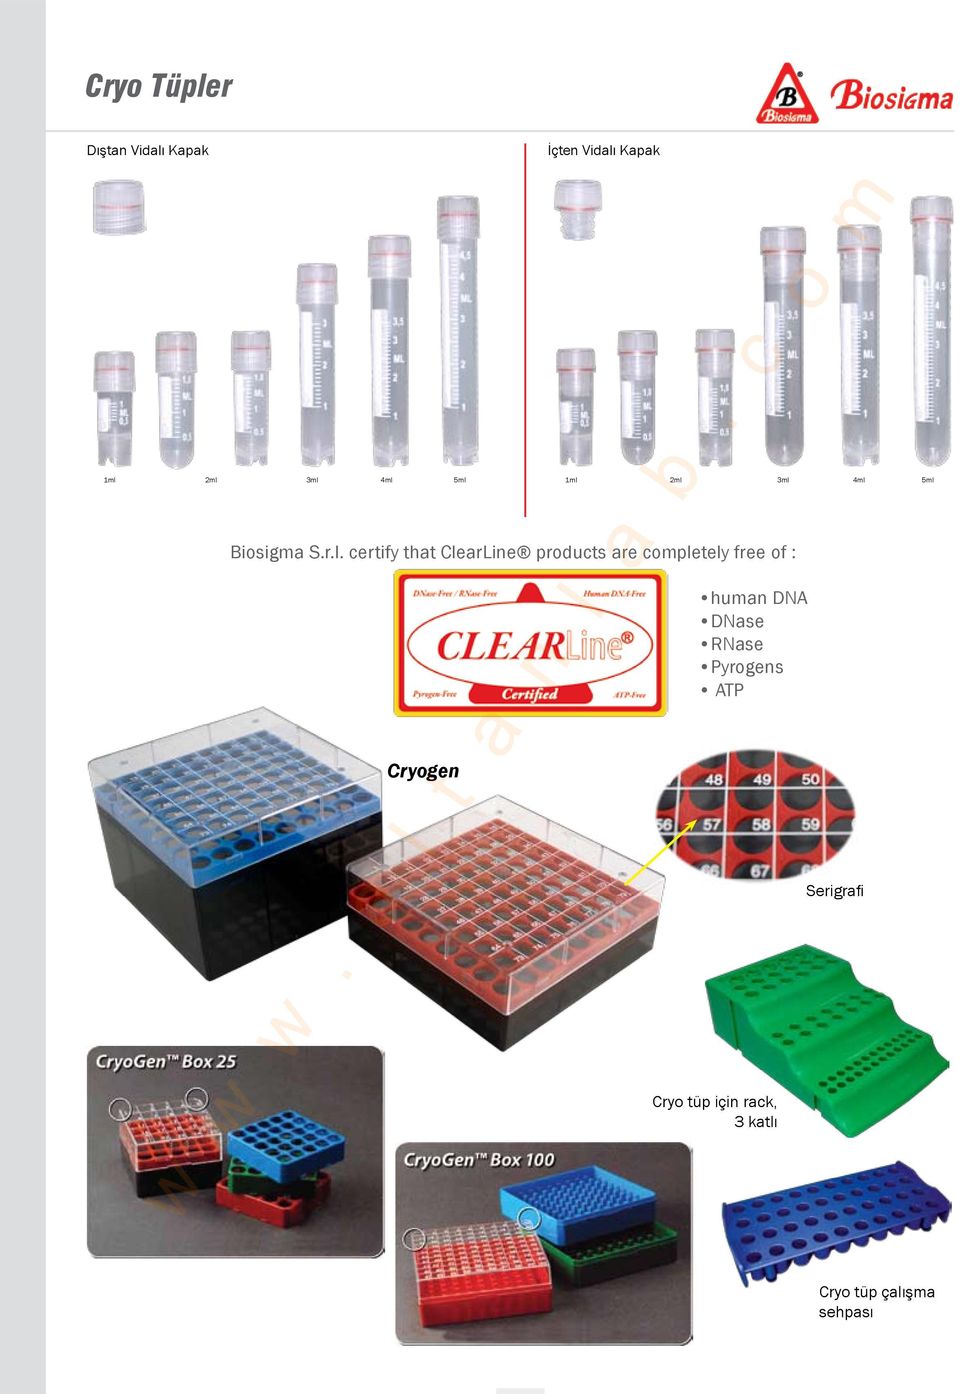 2ml 3ml 4ml 5ml Biosigma S.r.l. certify that ClearLine products are